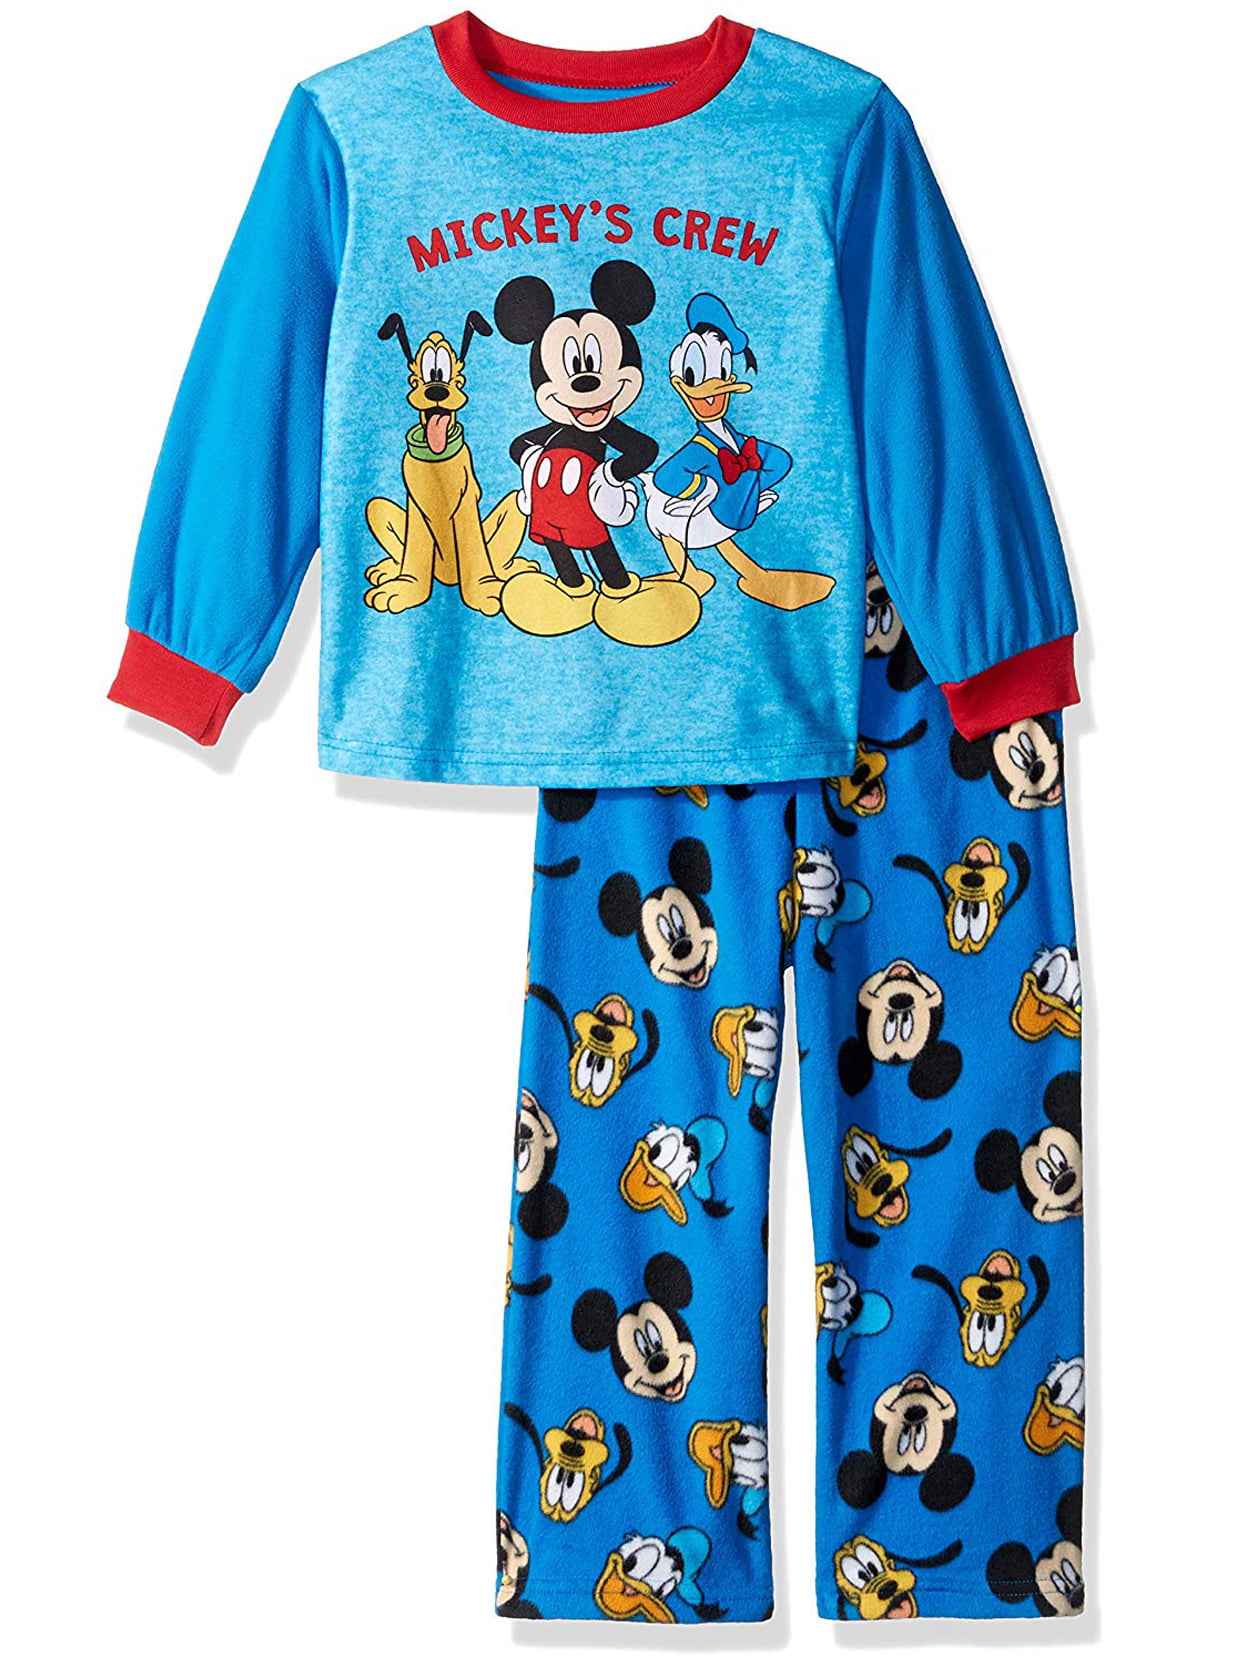 Official Mickey Mouse Pyjamas Pajamas Pjs Boys Toddlers Children 9-24 Months 